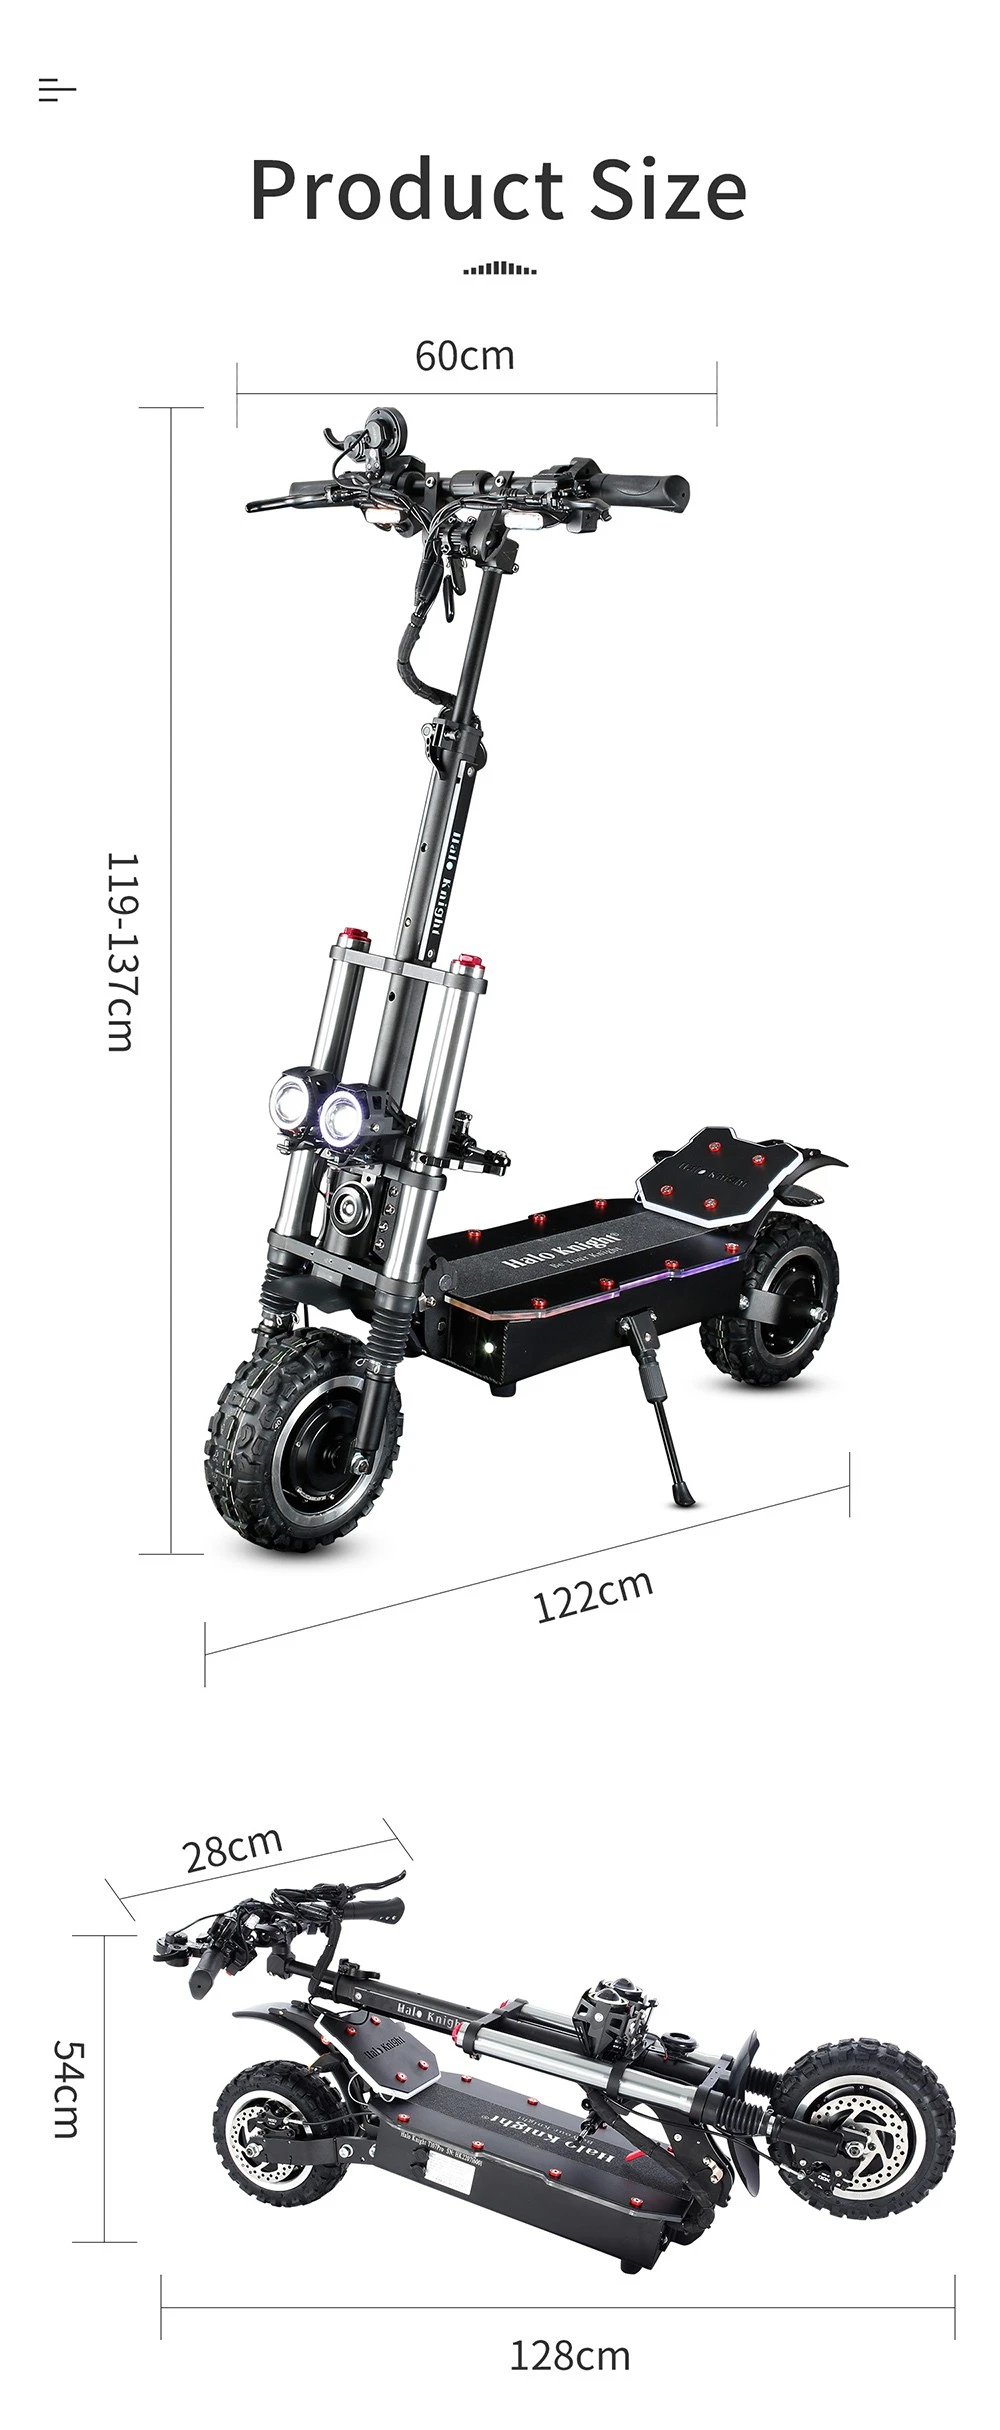 https://img.gkbcdn.com/d/202210/Halo-Knight-T107-Pro-Electric-Scooter-11---Off-road-Tire-517422-11._p1_.jpg